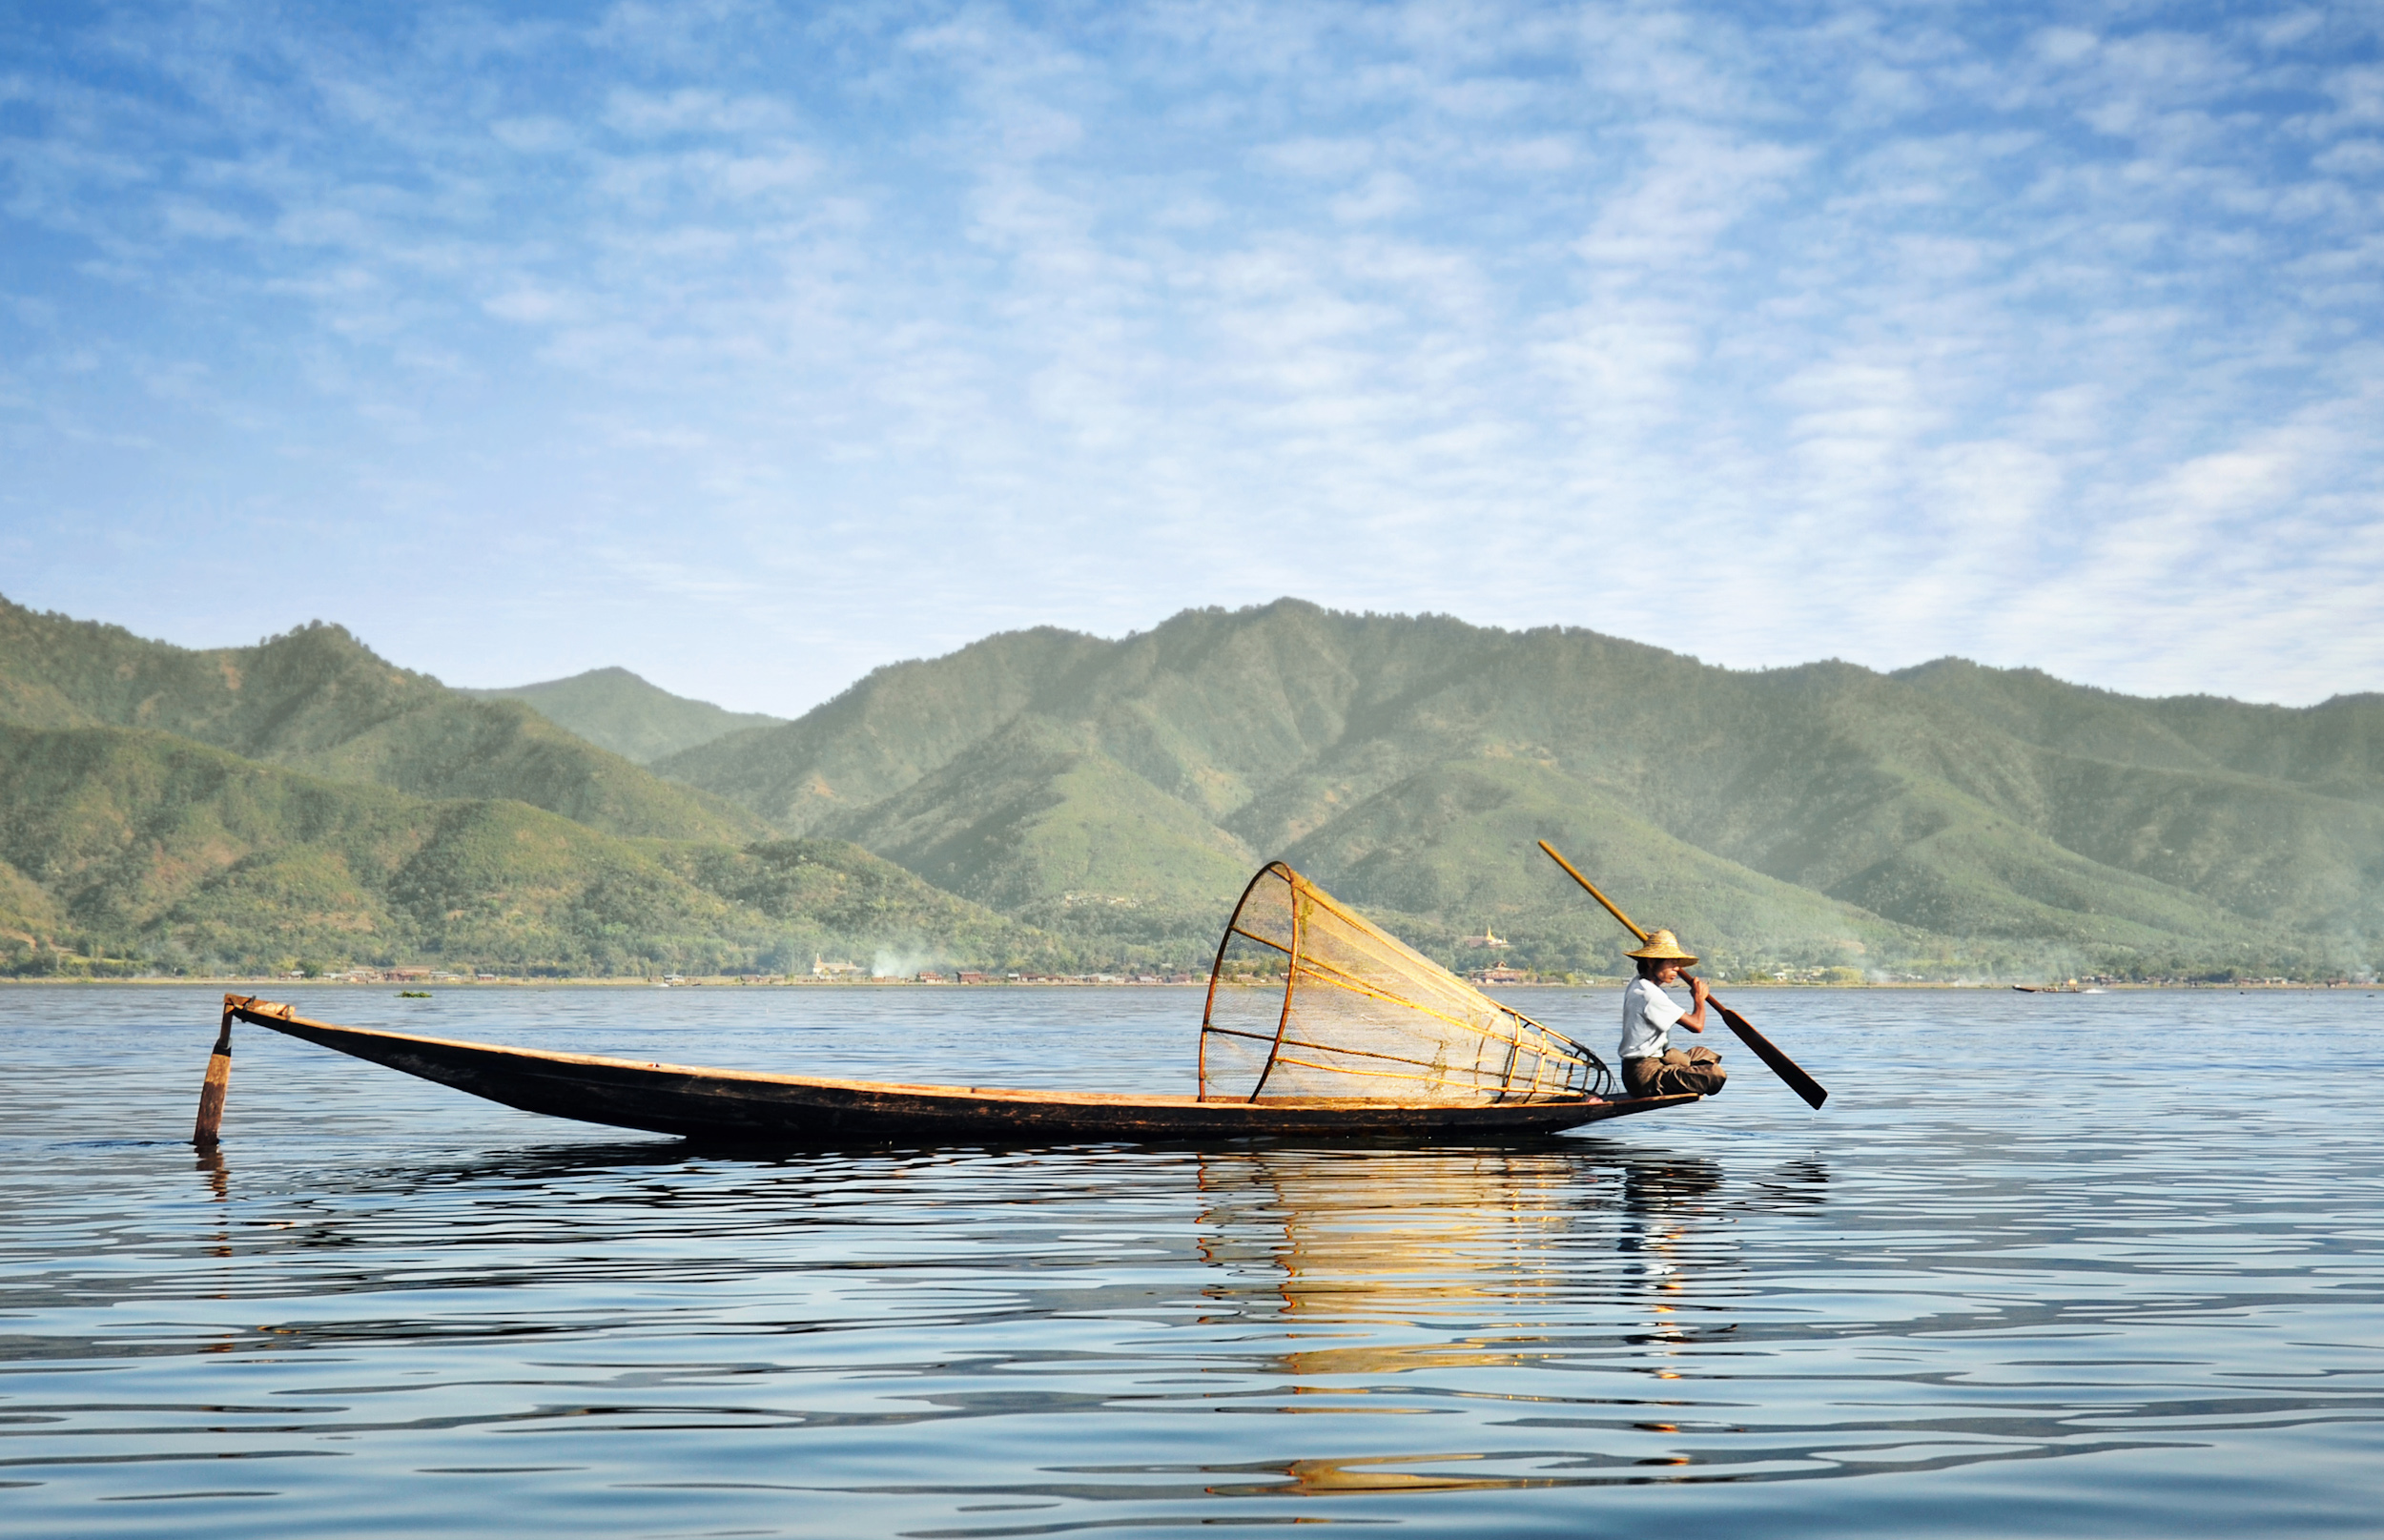 A local fisherman in Myanmar with a conical fish net on his boat in Myanmar